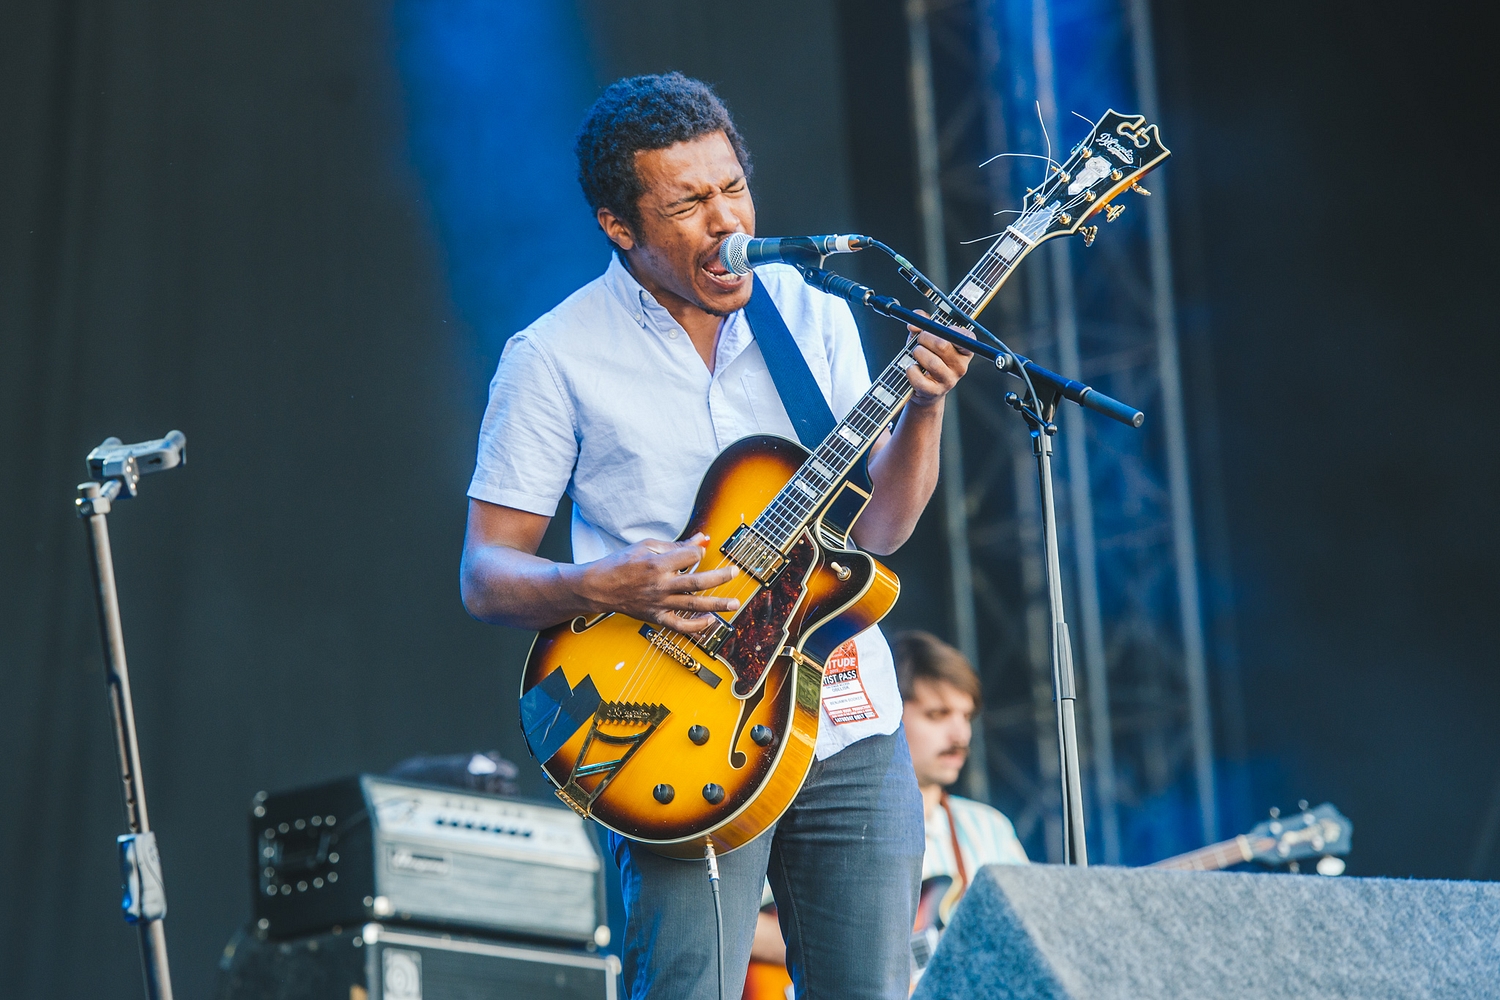 Benjamin Booker brings gritty, macabre Blues to Latitude 2015